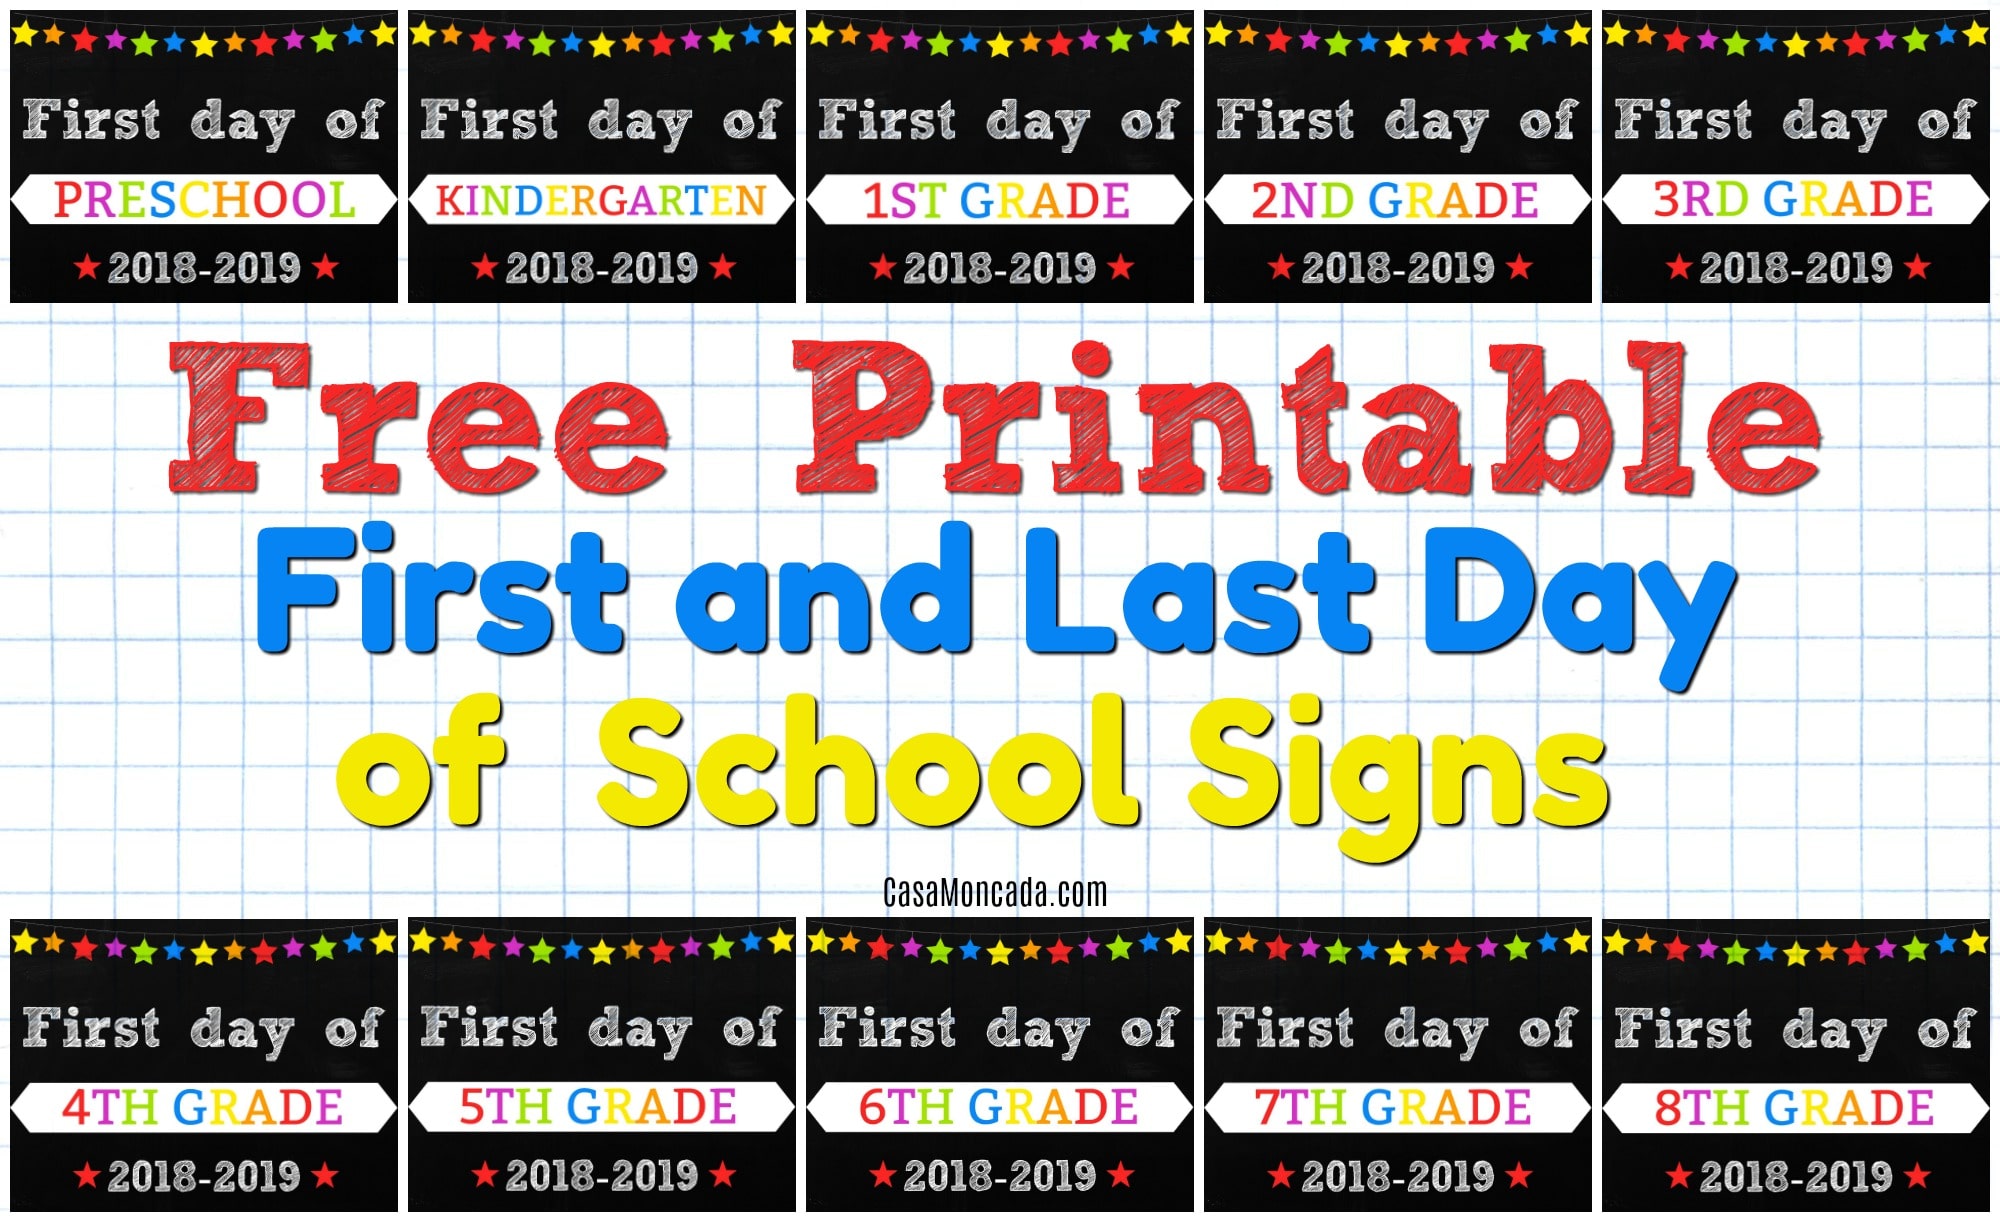 free-printable-first-and-last-day-of-school-signs-sprinklediy